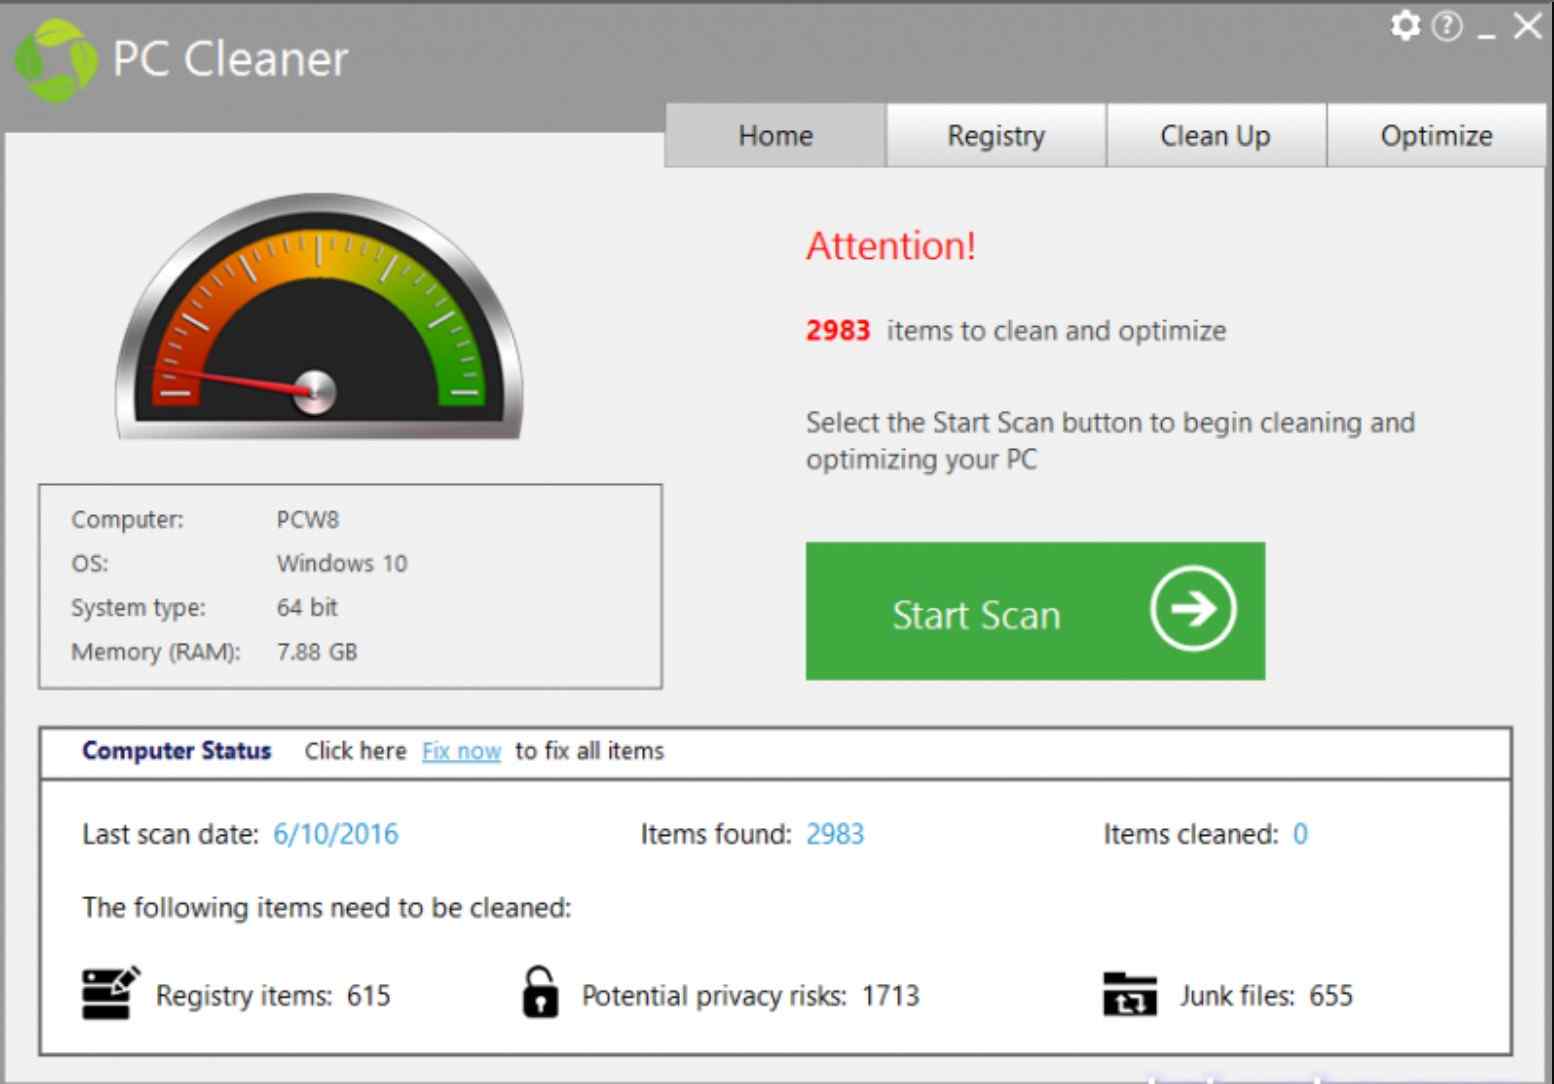 PC cleaner cleans all the bloatware that clots your PC’s speed over time.